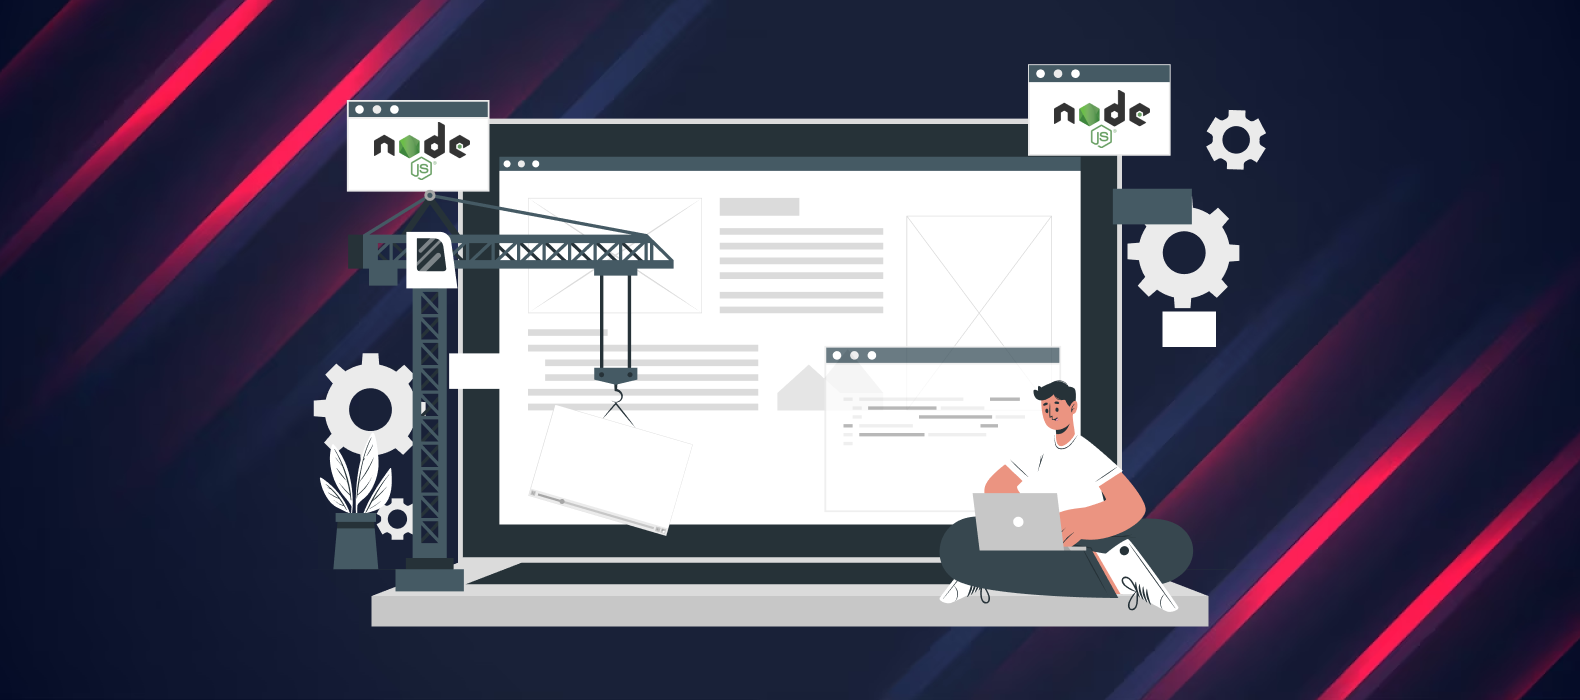 What is the use of Node.js in Web Development